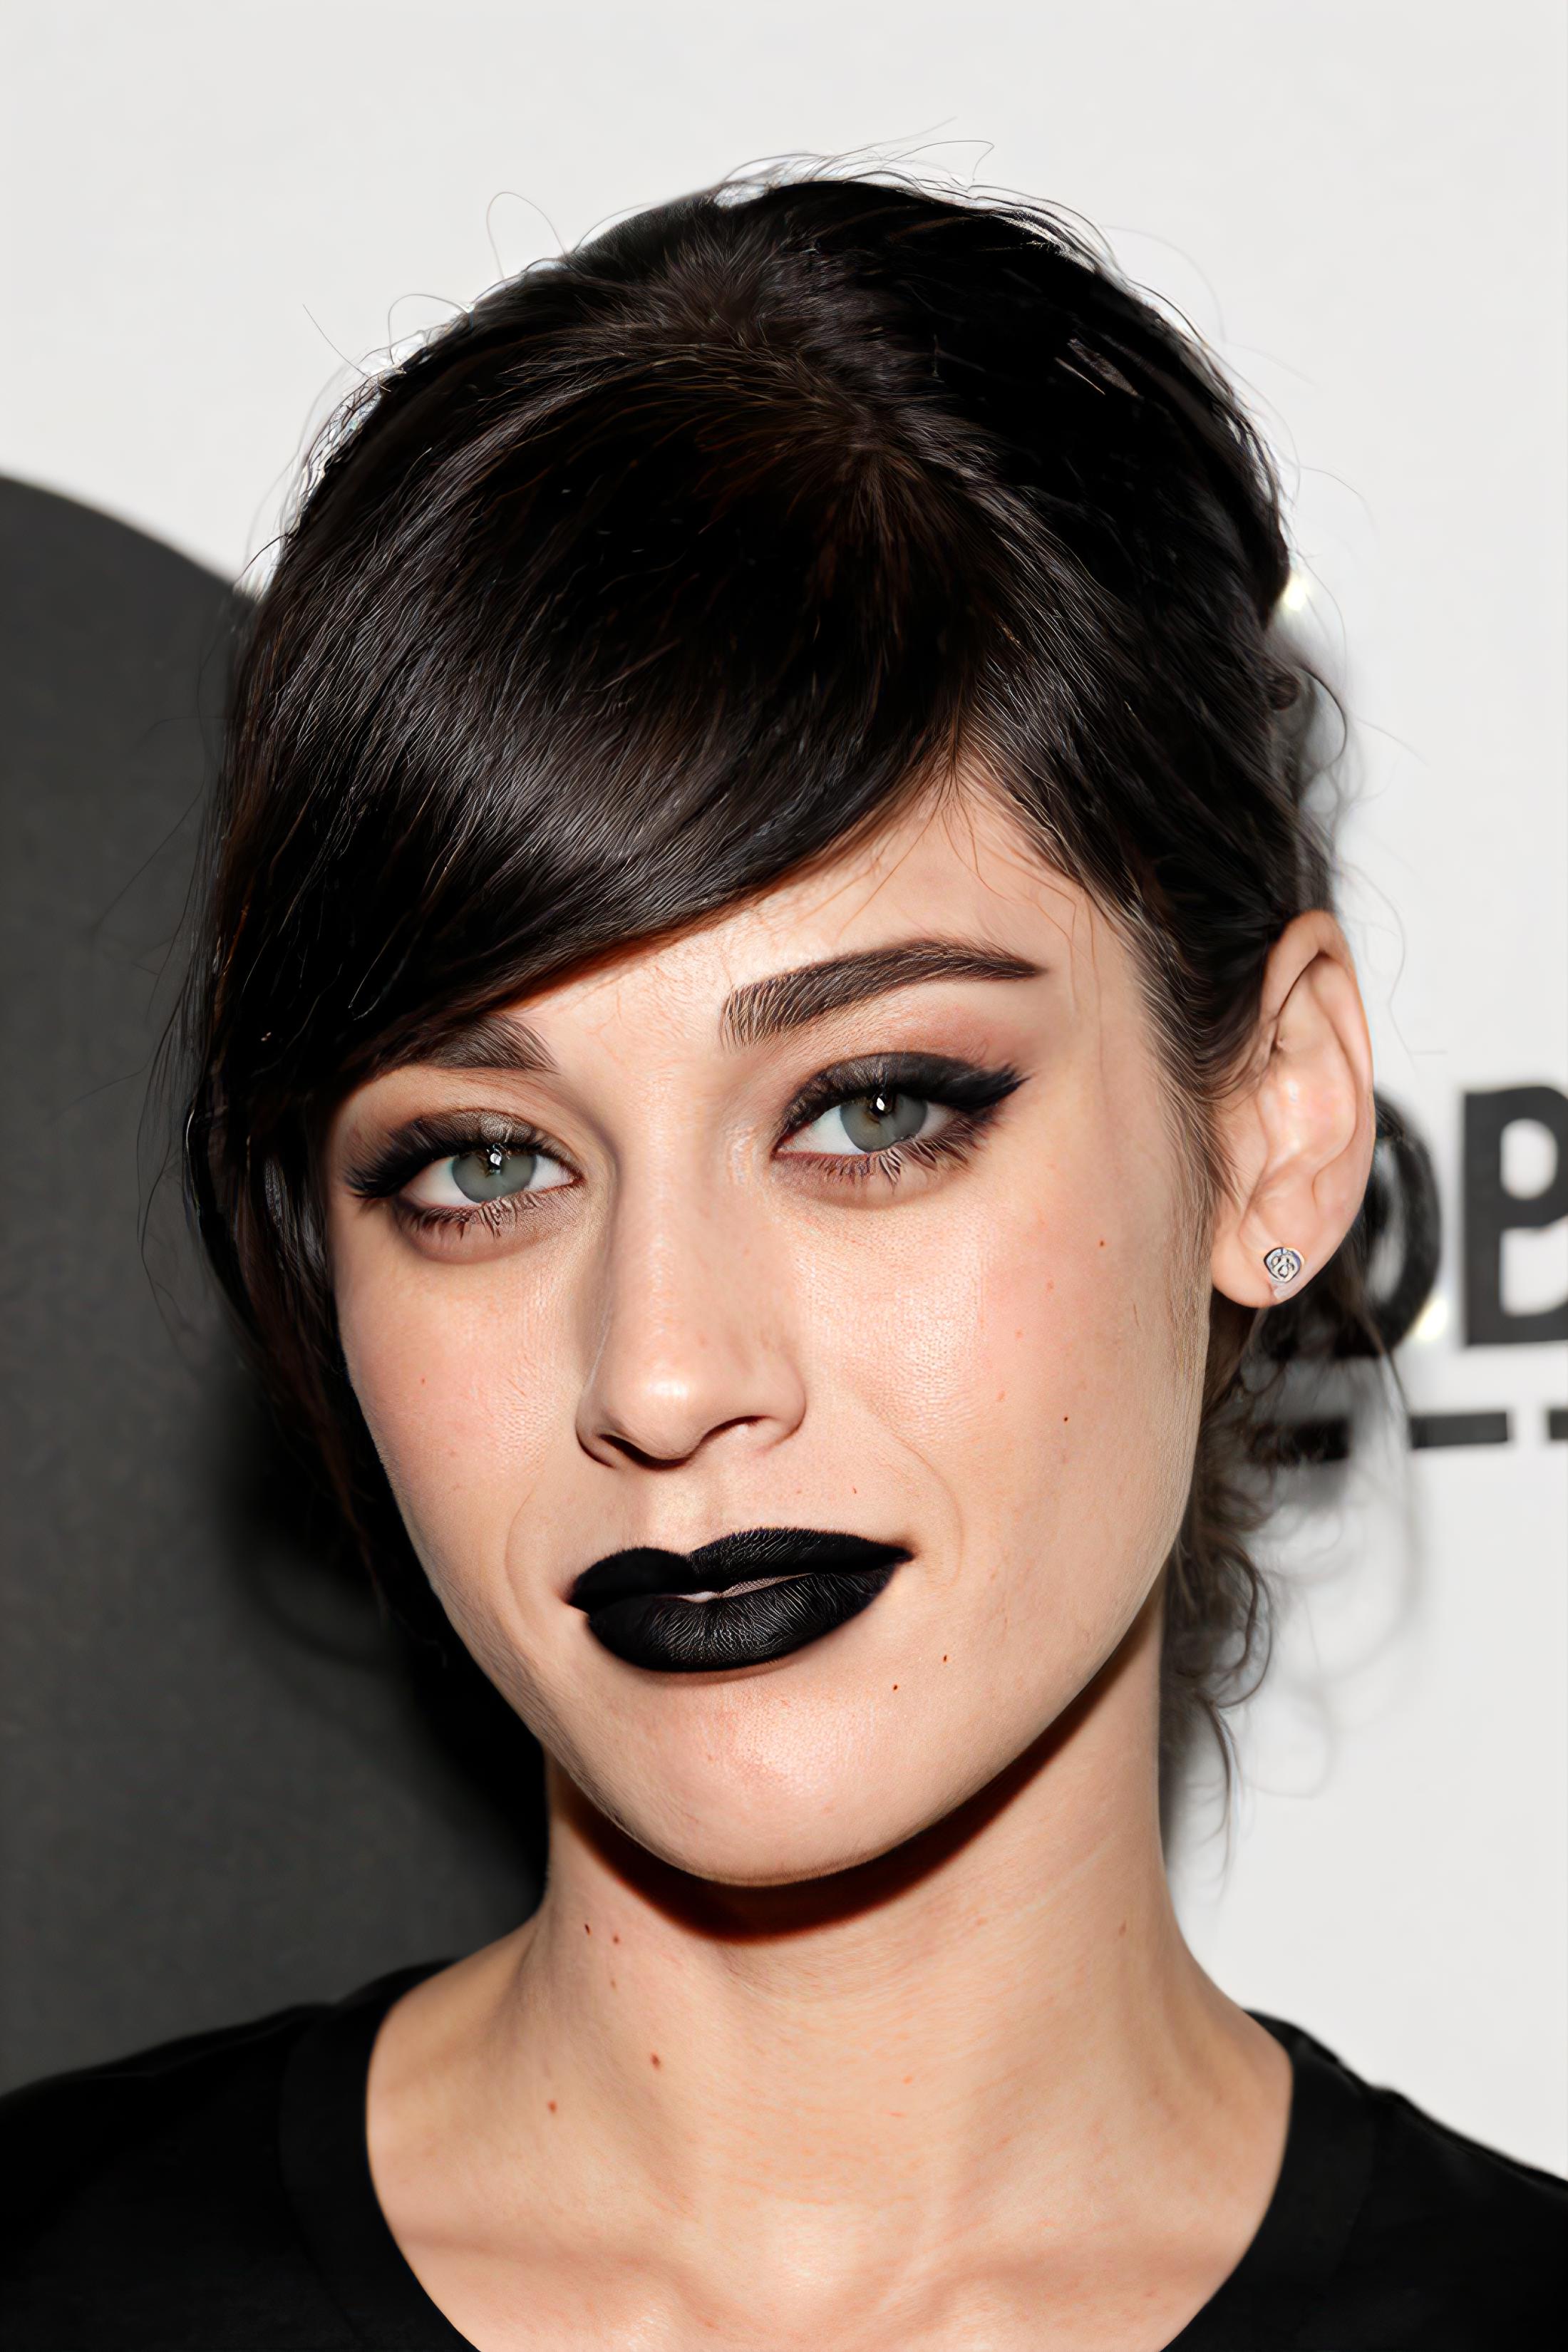 Lizzy Caplan image by __2_